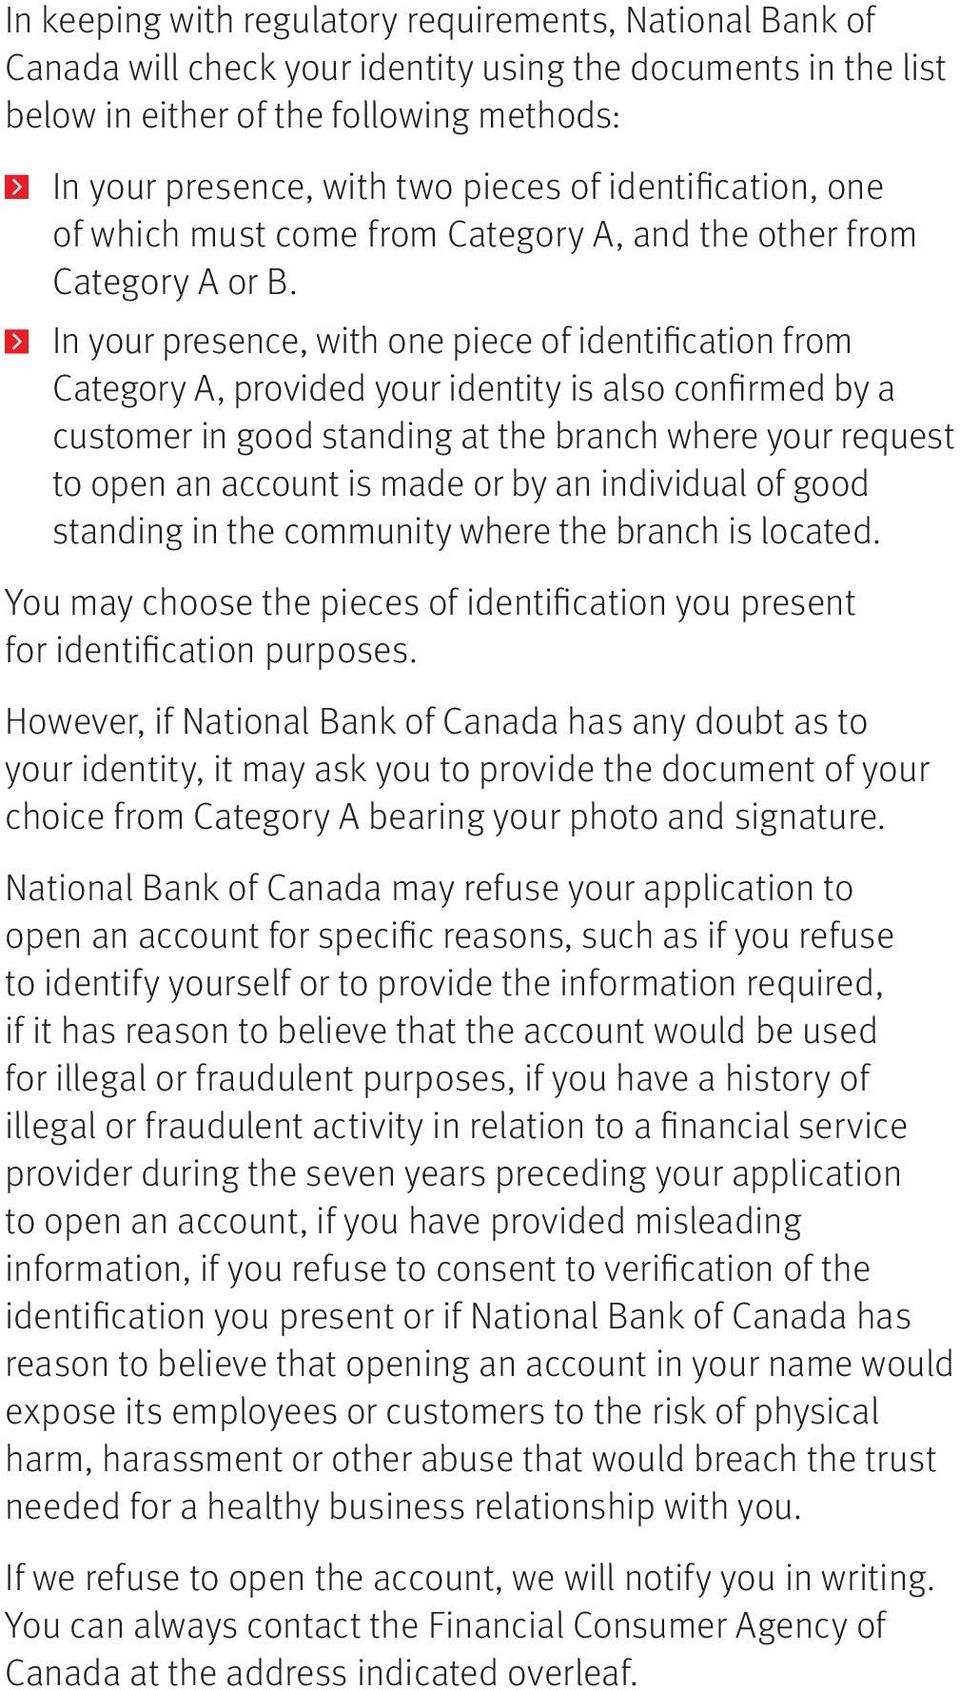 In your presence, with one piece of identification from Category A, provided your identity is also confirmed by a customer in good standing at the branch where your request to open an account is made